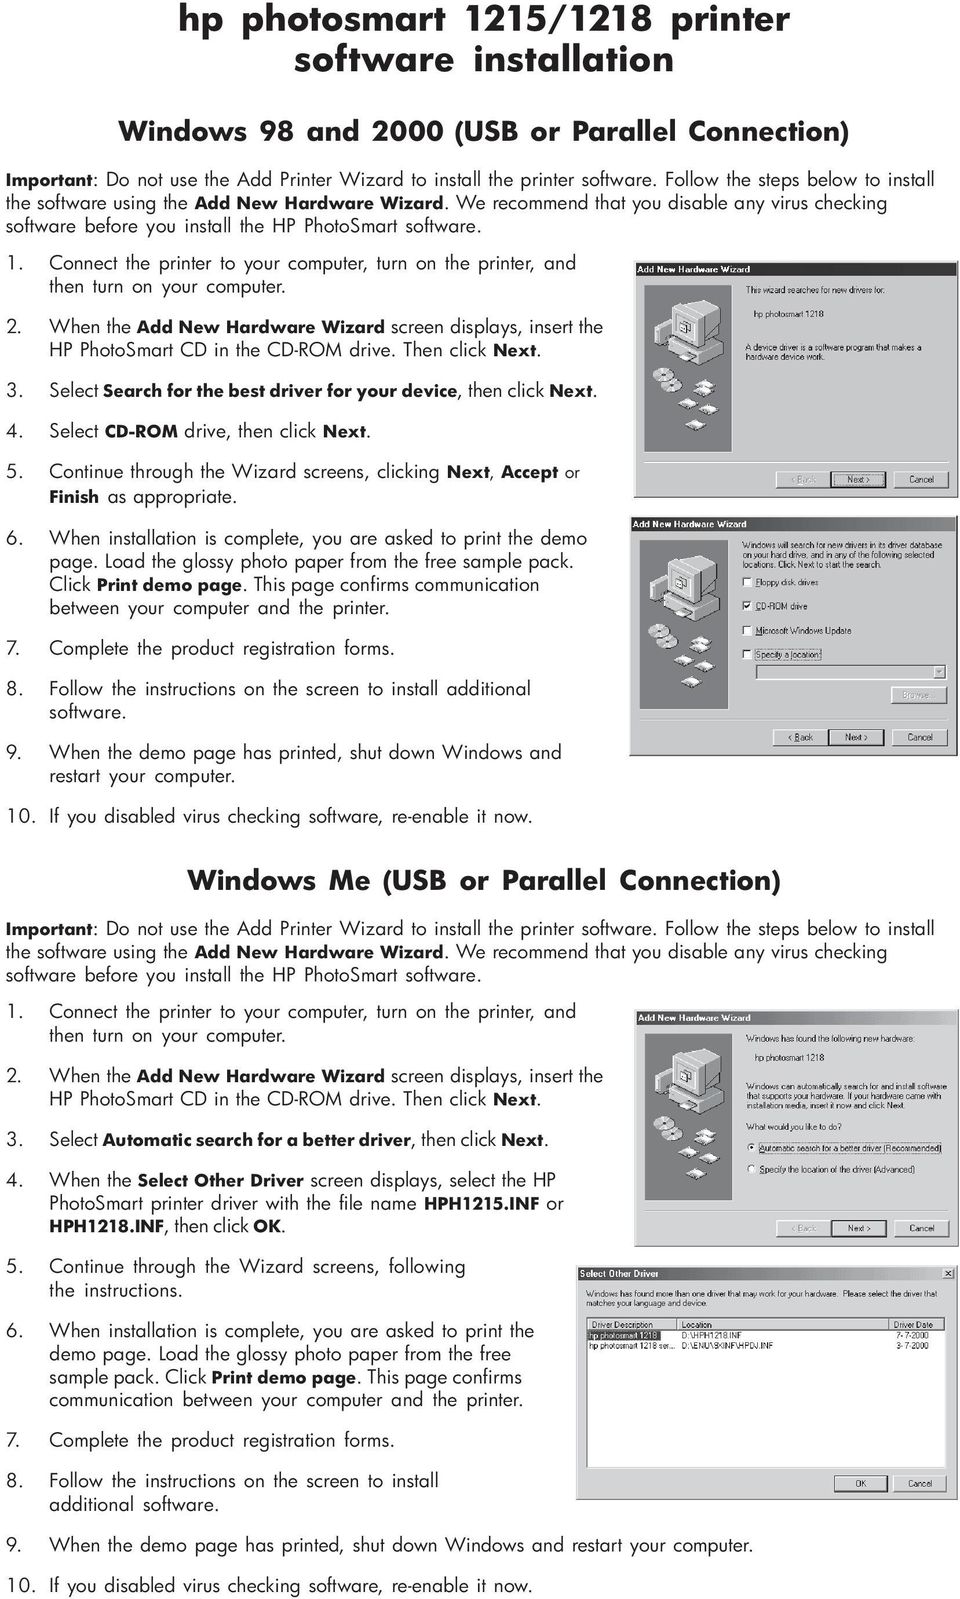 Connect the printer to your computer, turn on the printer, and then turn on your computer. 2. When the Add New Hardware Wizard screen displays, insert the HP PhotoSmart CD in the CD-ROM drive.